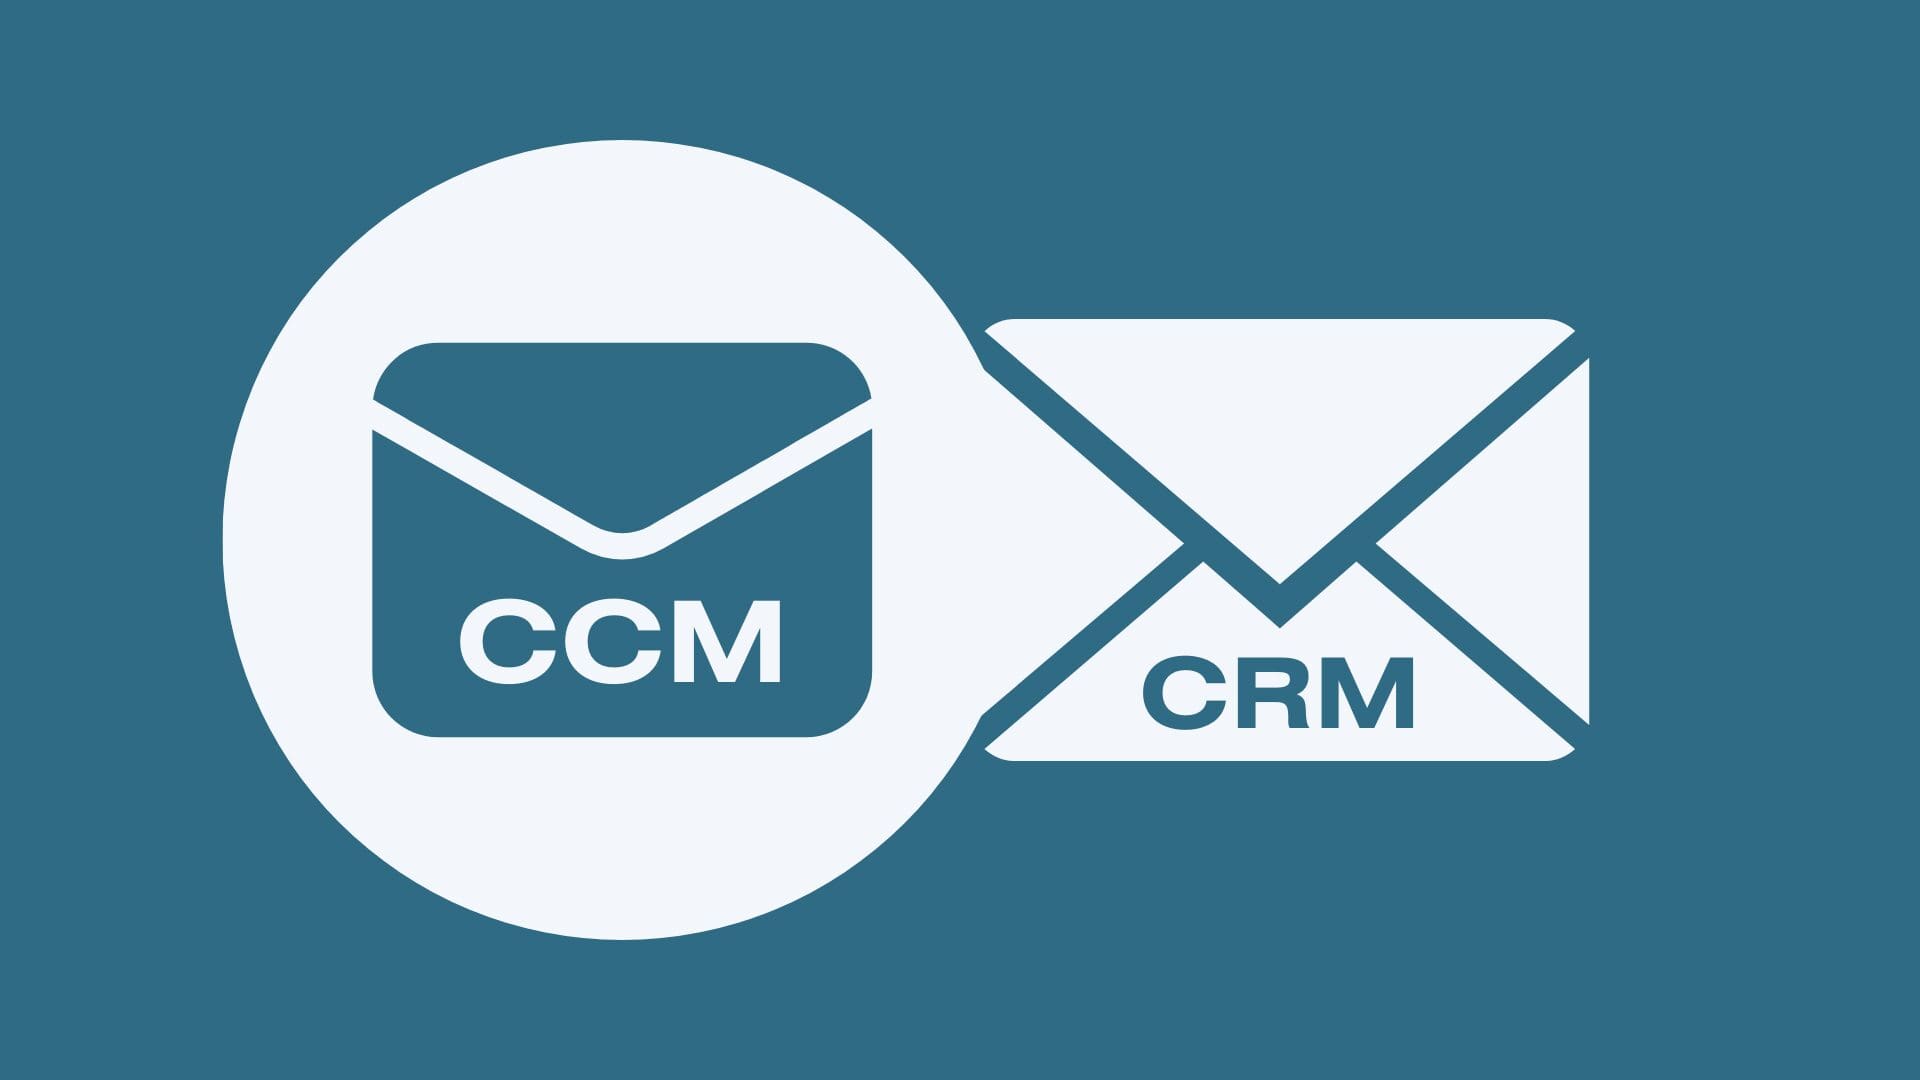 CRM and CCM envelopes morphed into one.